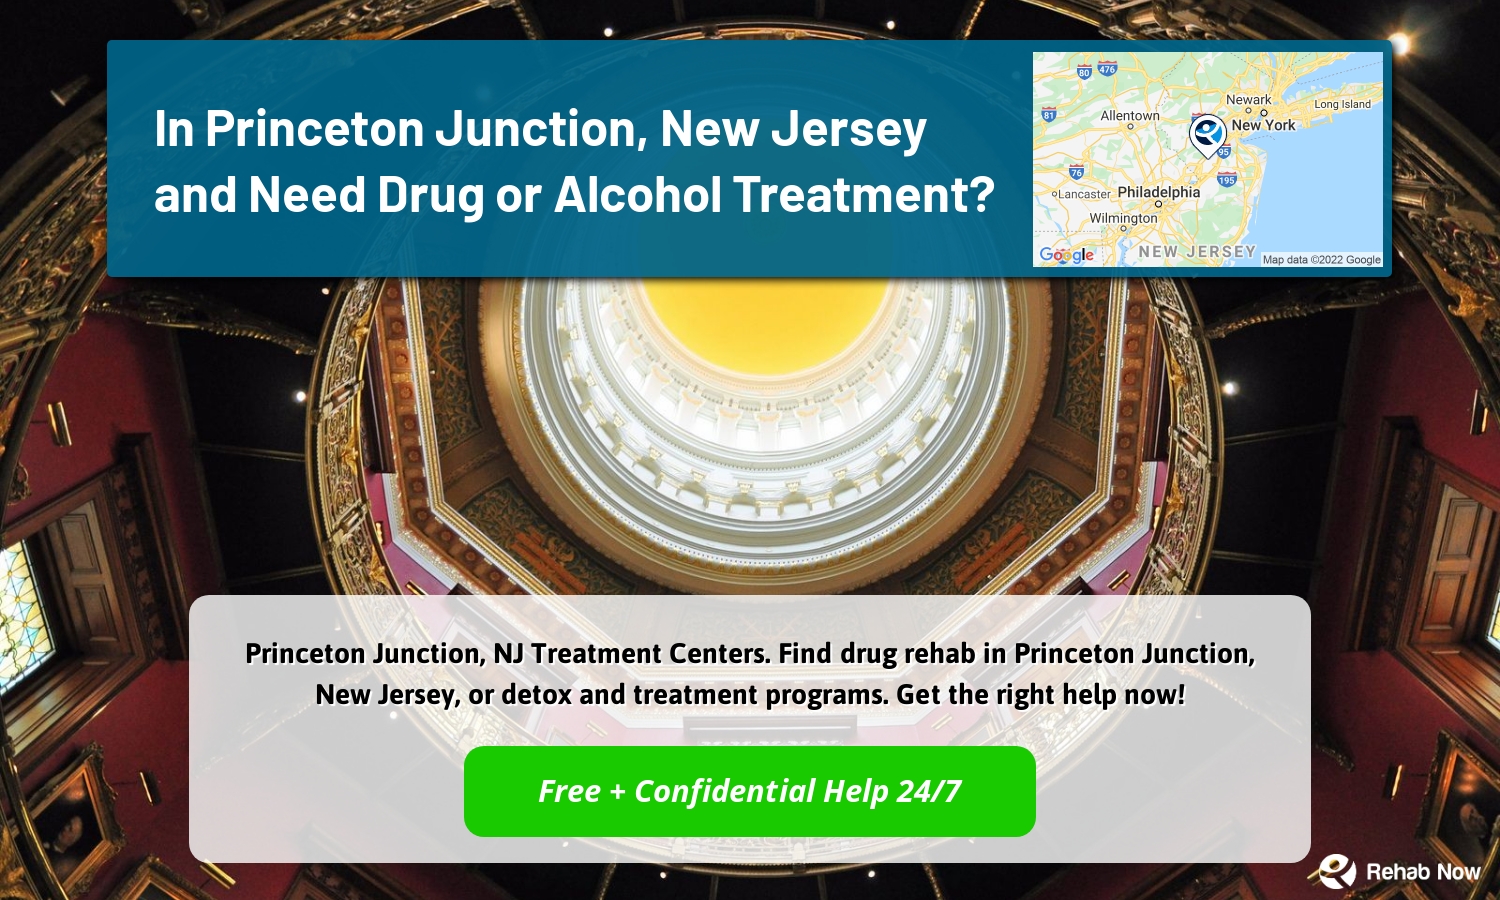 Princeton Junction, NJ Treatment Centers. Find drug rehab in Princeton Junction, New Jersey, or detox and treatment programs. Get the right help now!